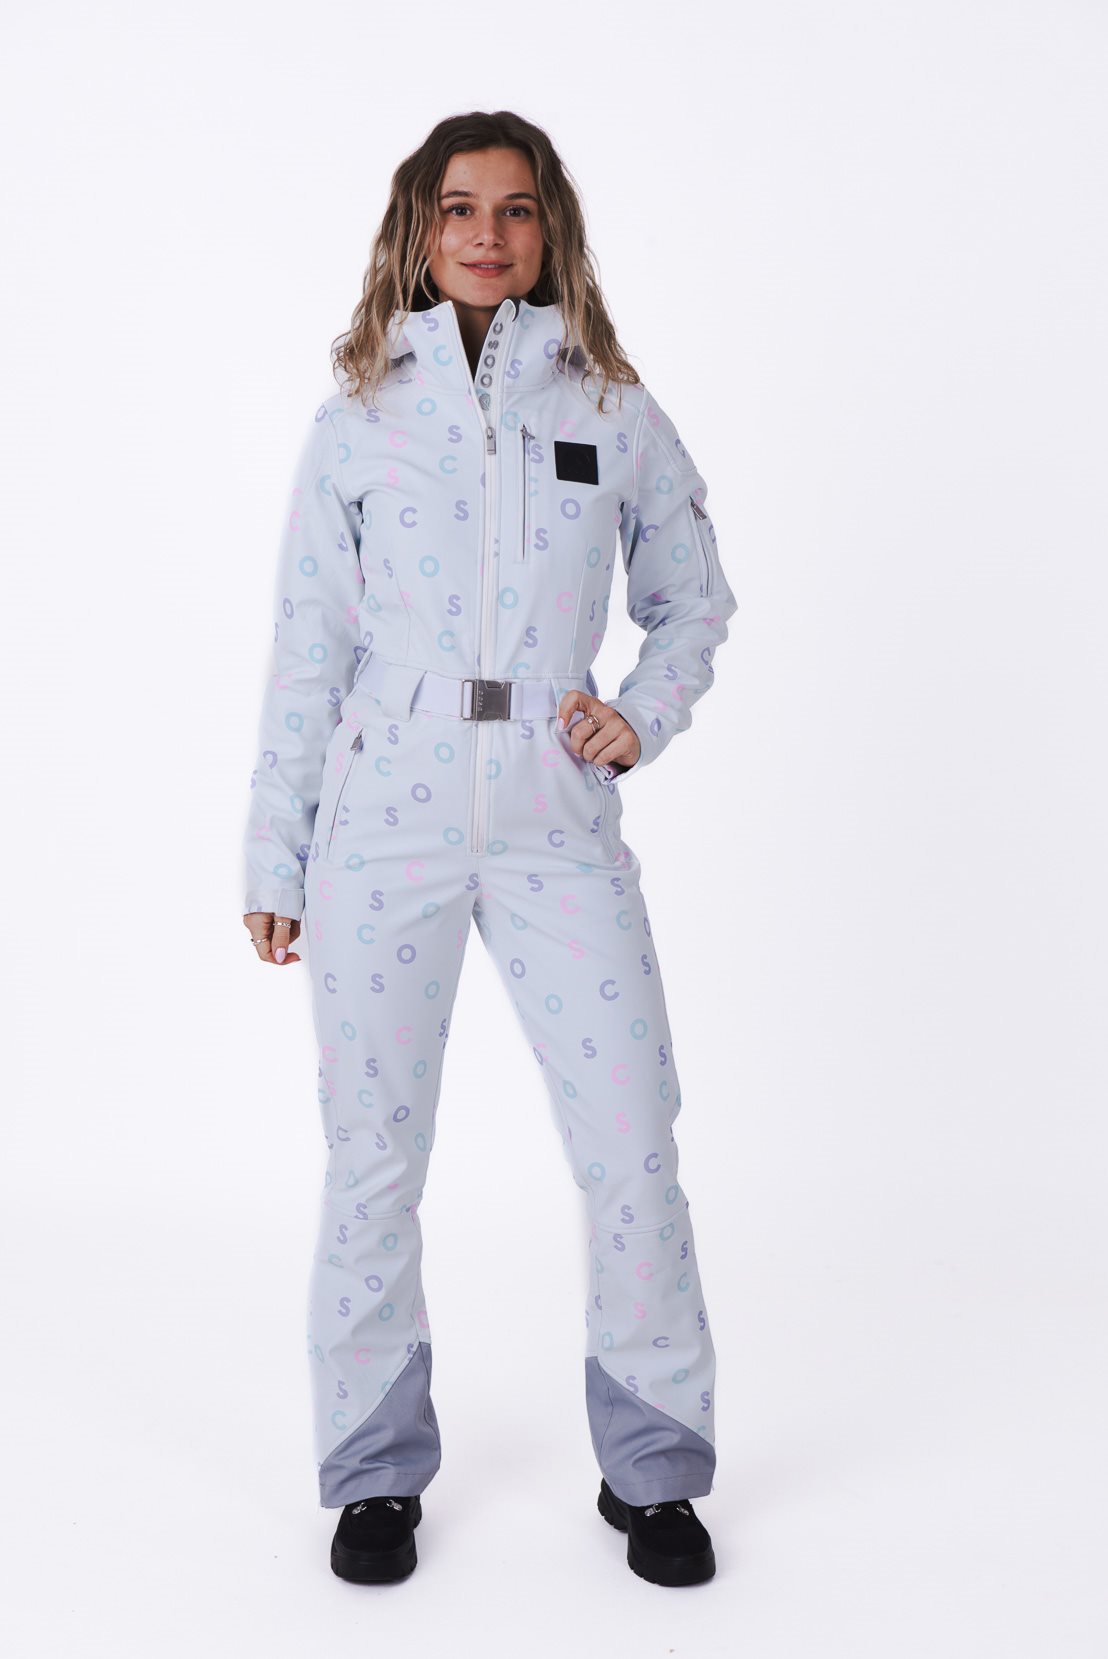 Chic Ski Suit - Mint – OOSC Clothing - USA